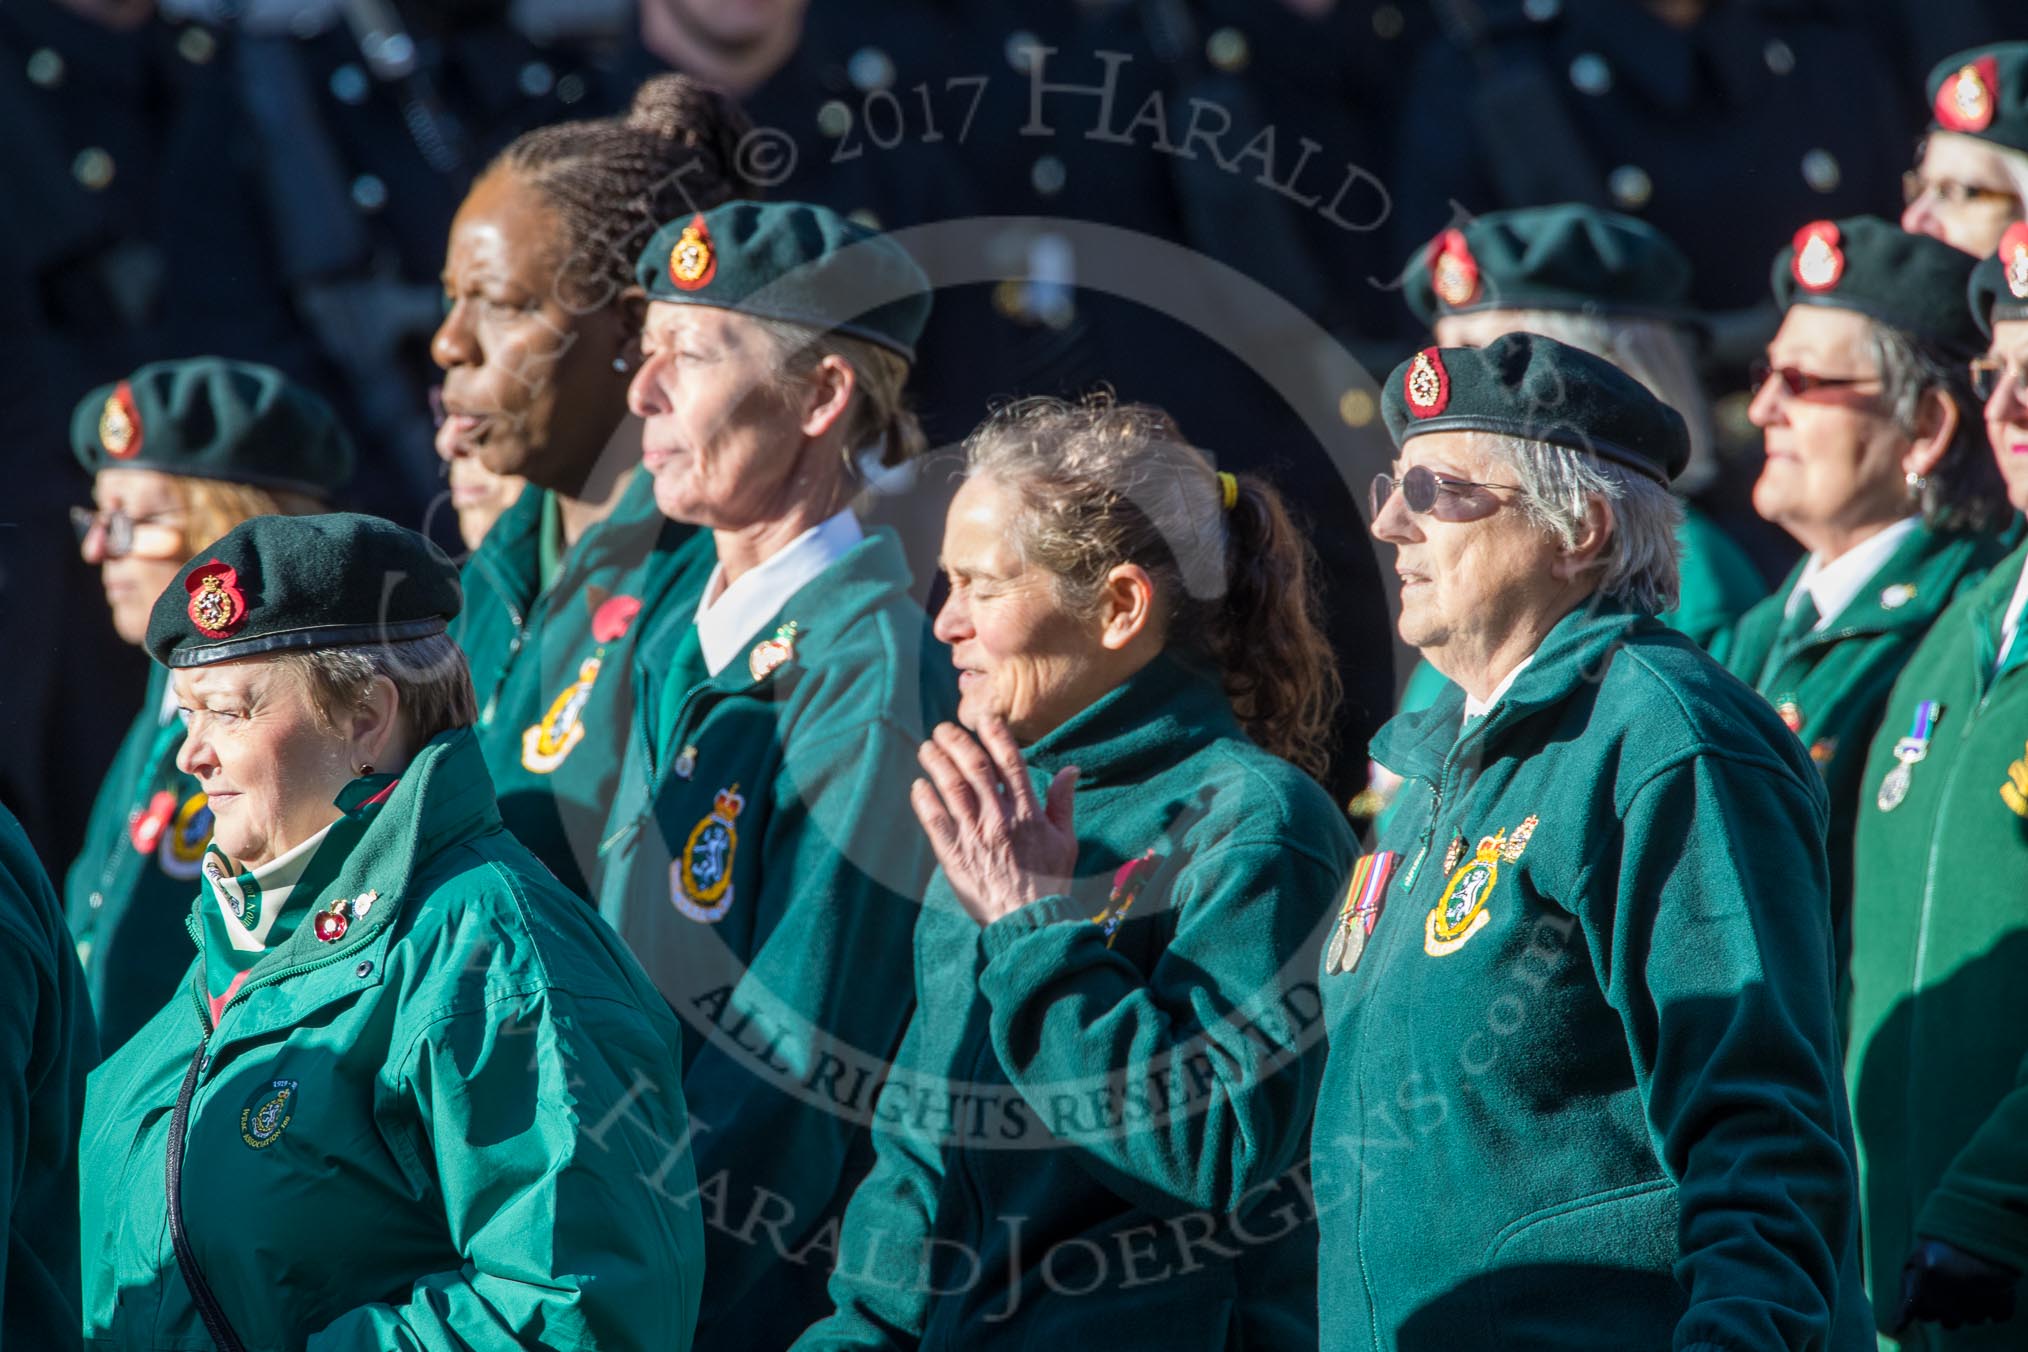 WRAC Association (Group B40, 95 members) during the Royal British Legion March Past on Remembrance Sunday at the Cenotaph, Whitehall, Westminster, London, 11 November 2018, 12:13.